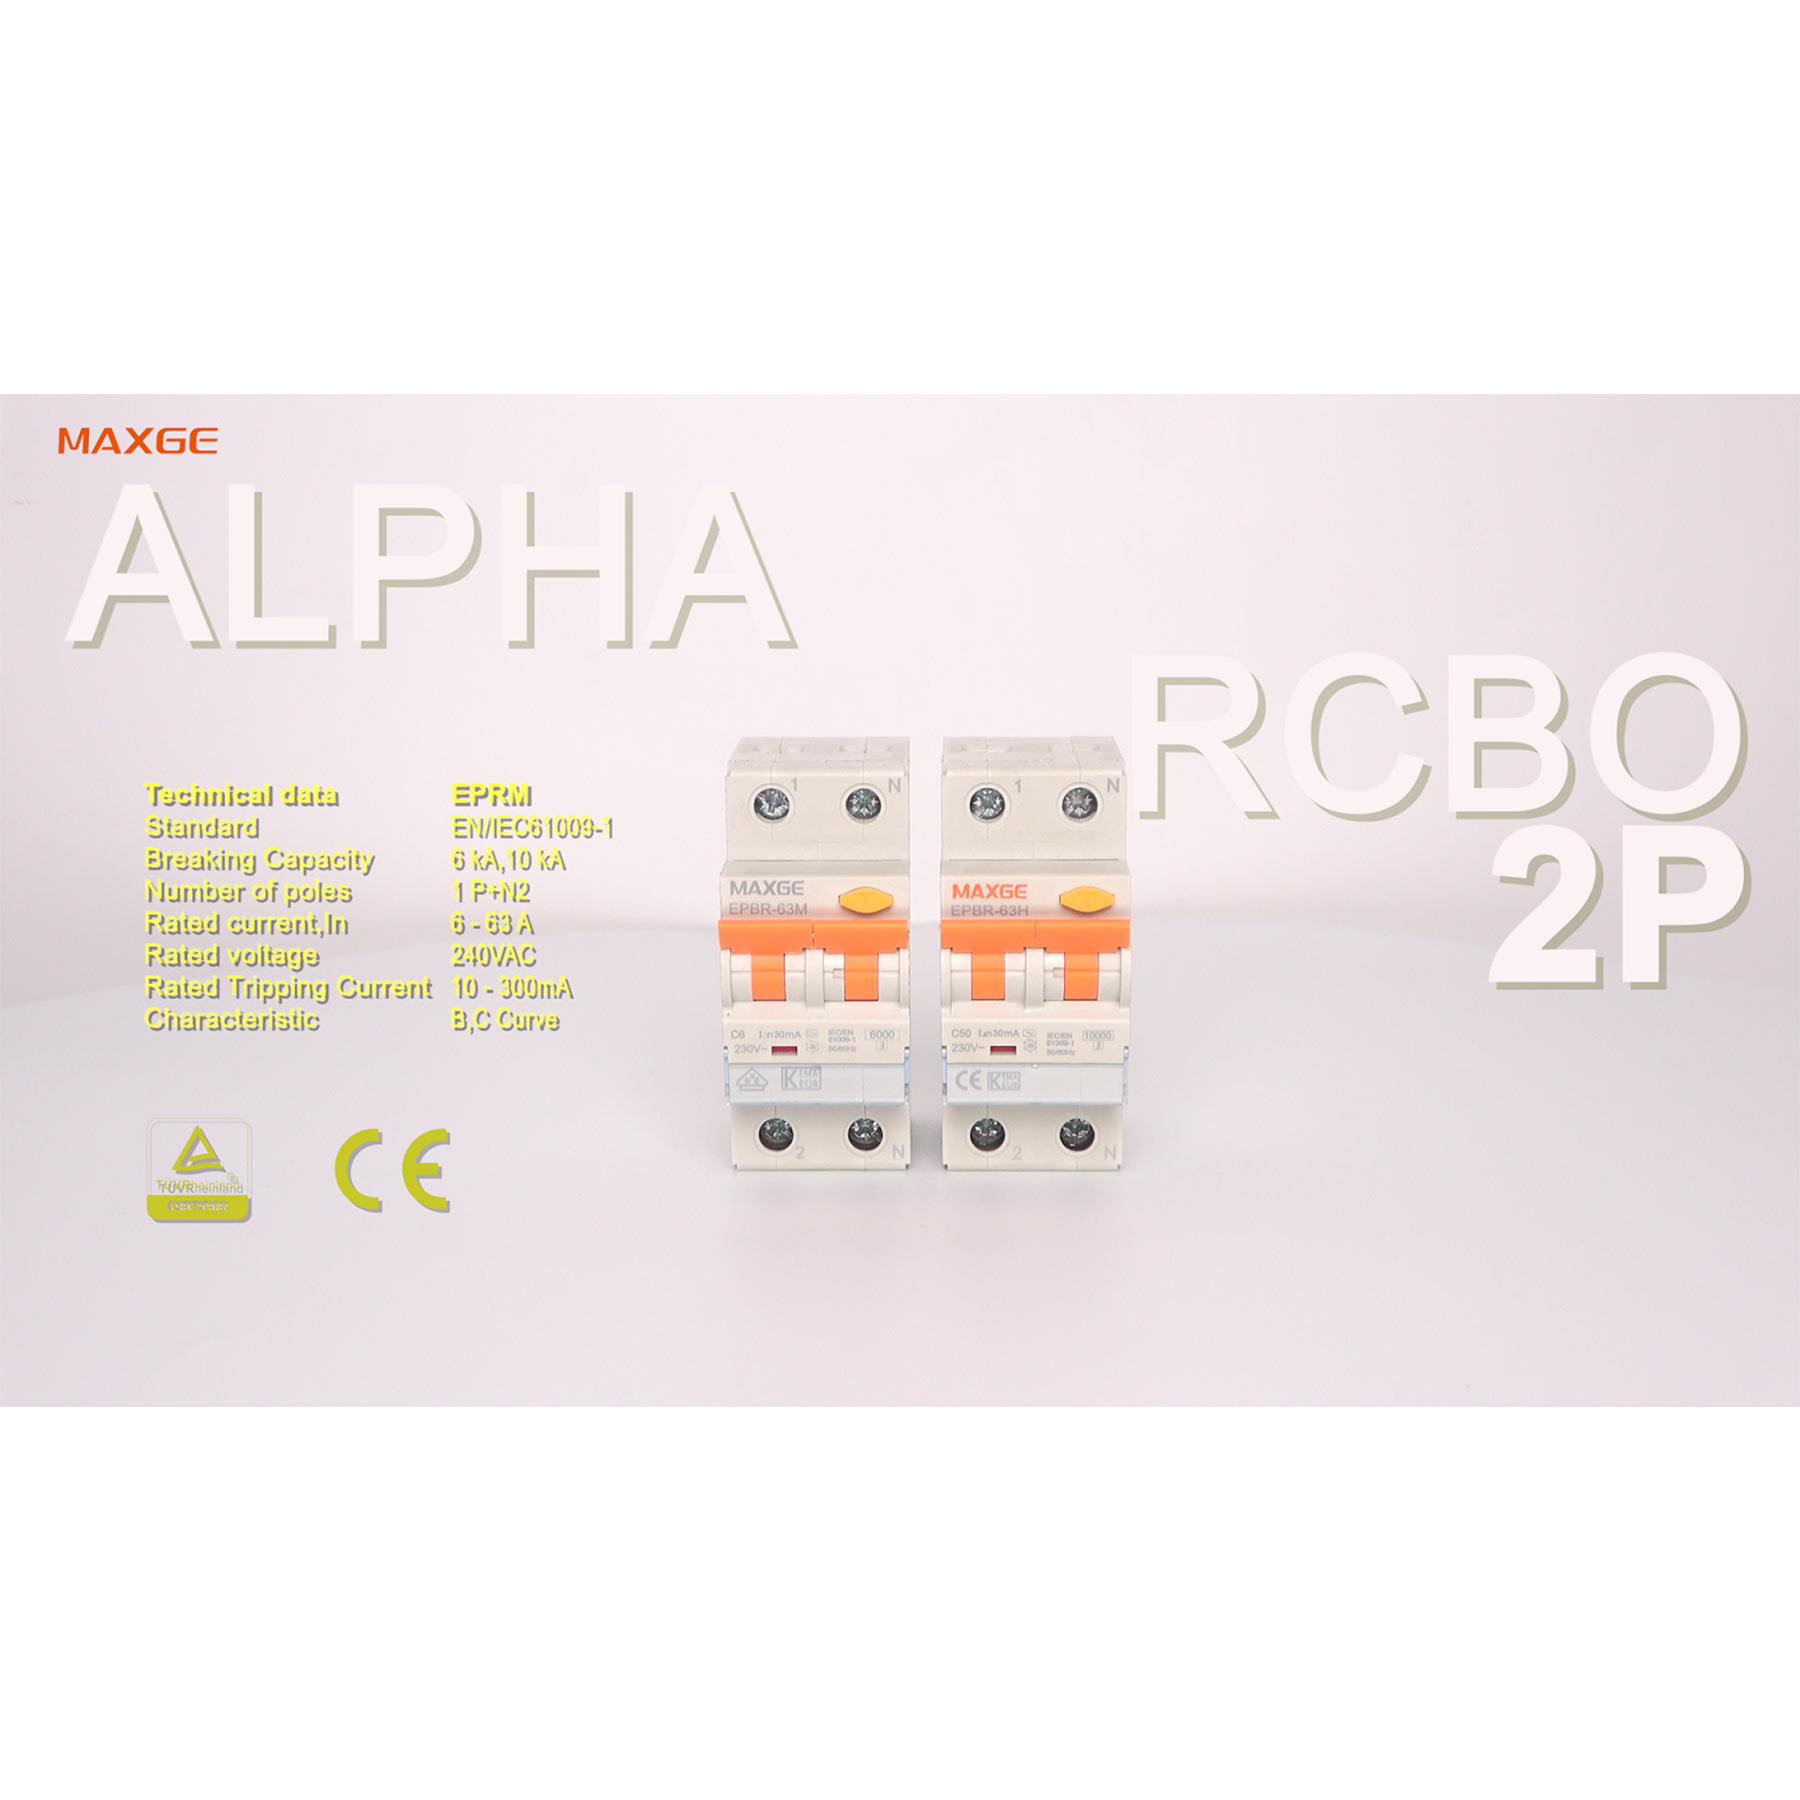 Alpha series：2P RCBO introduction